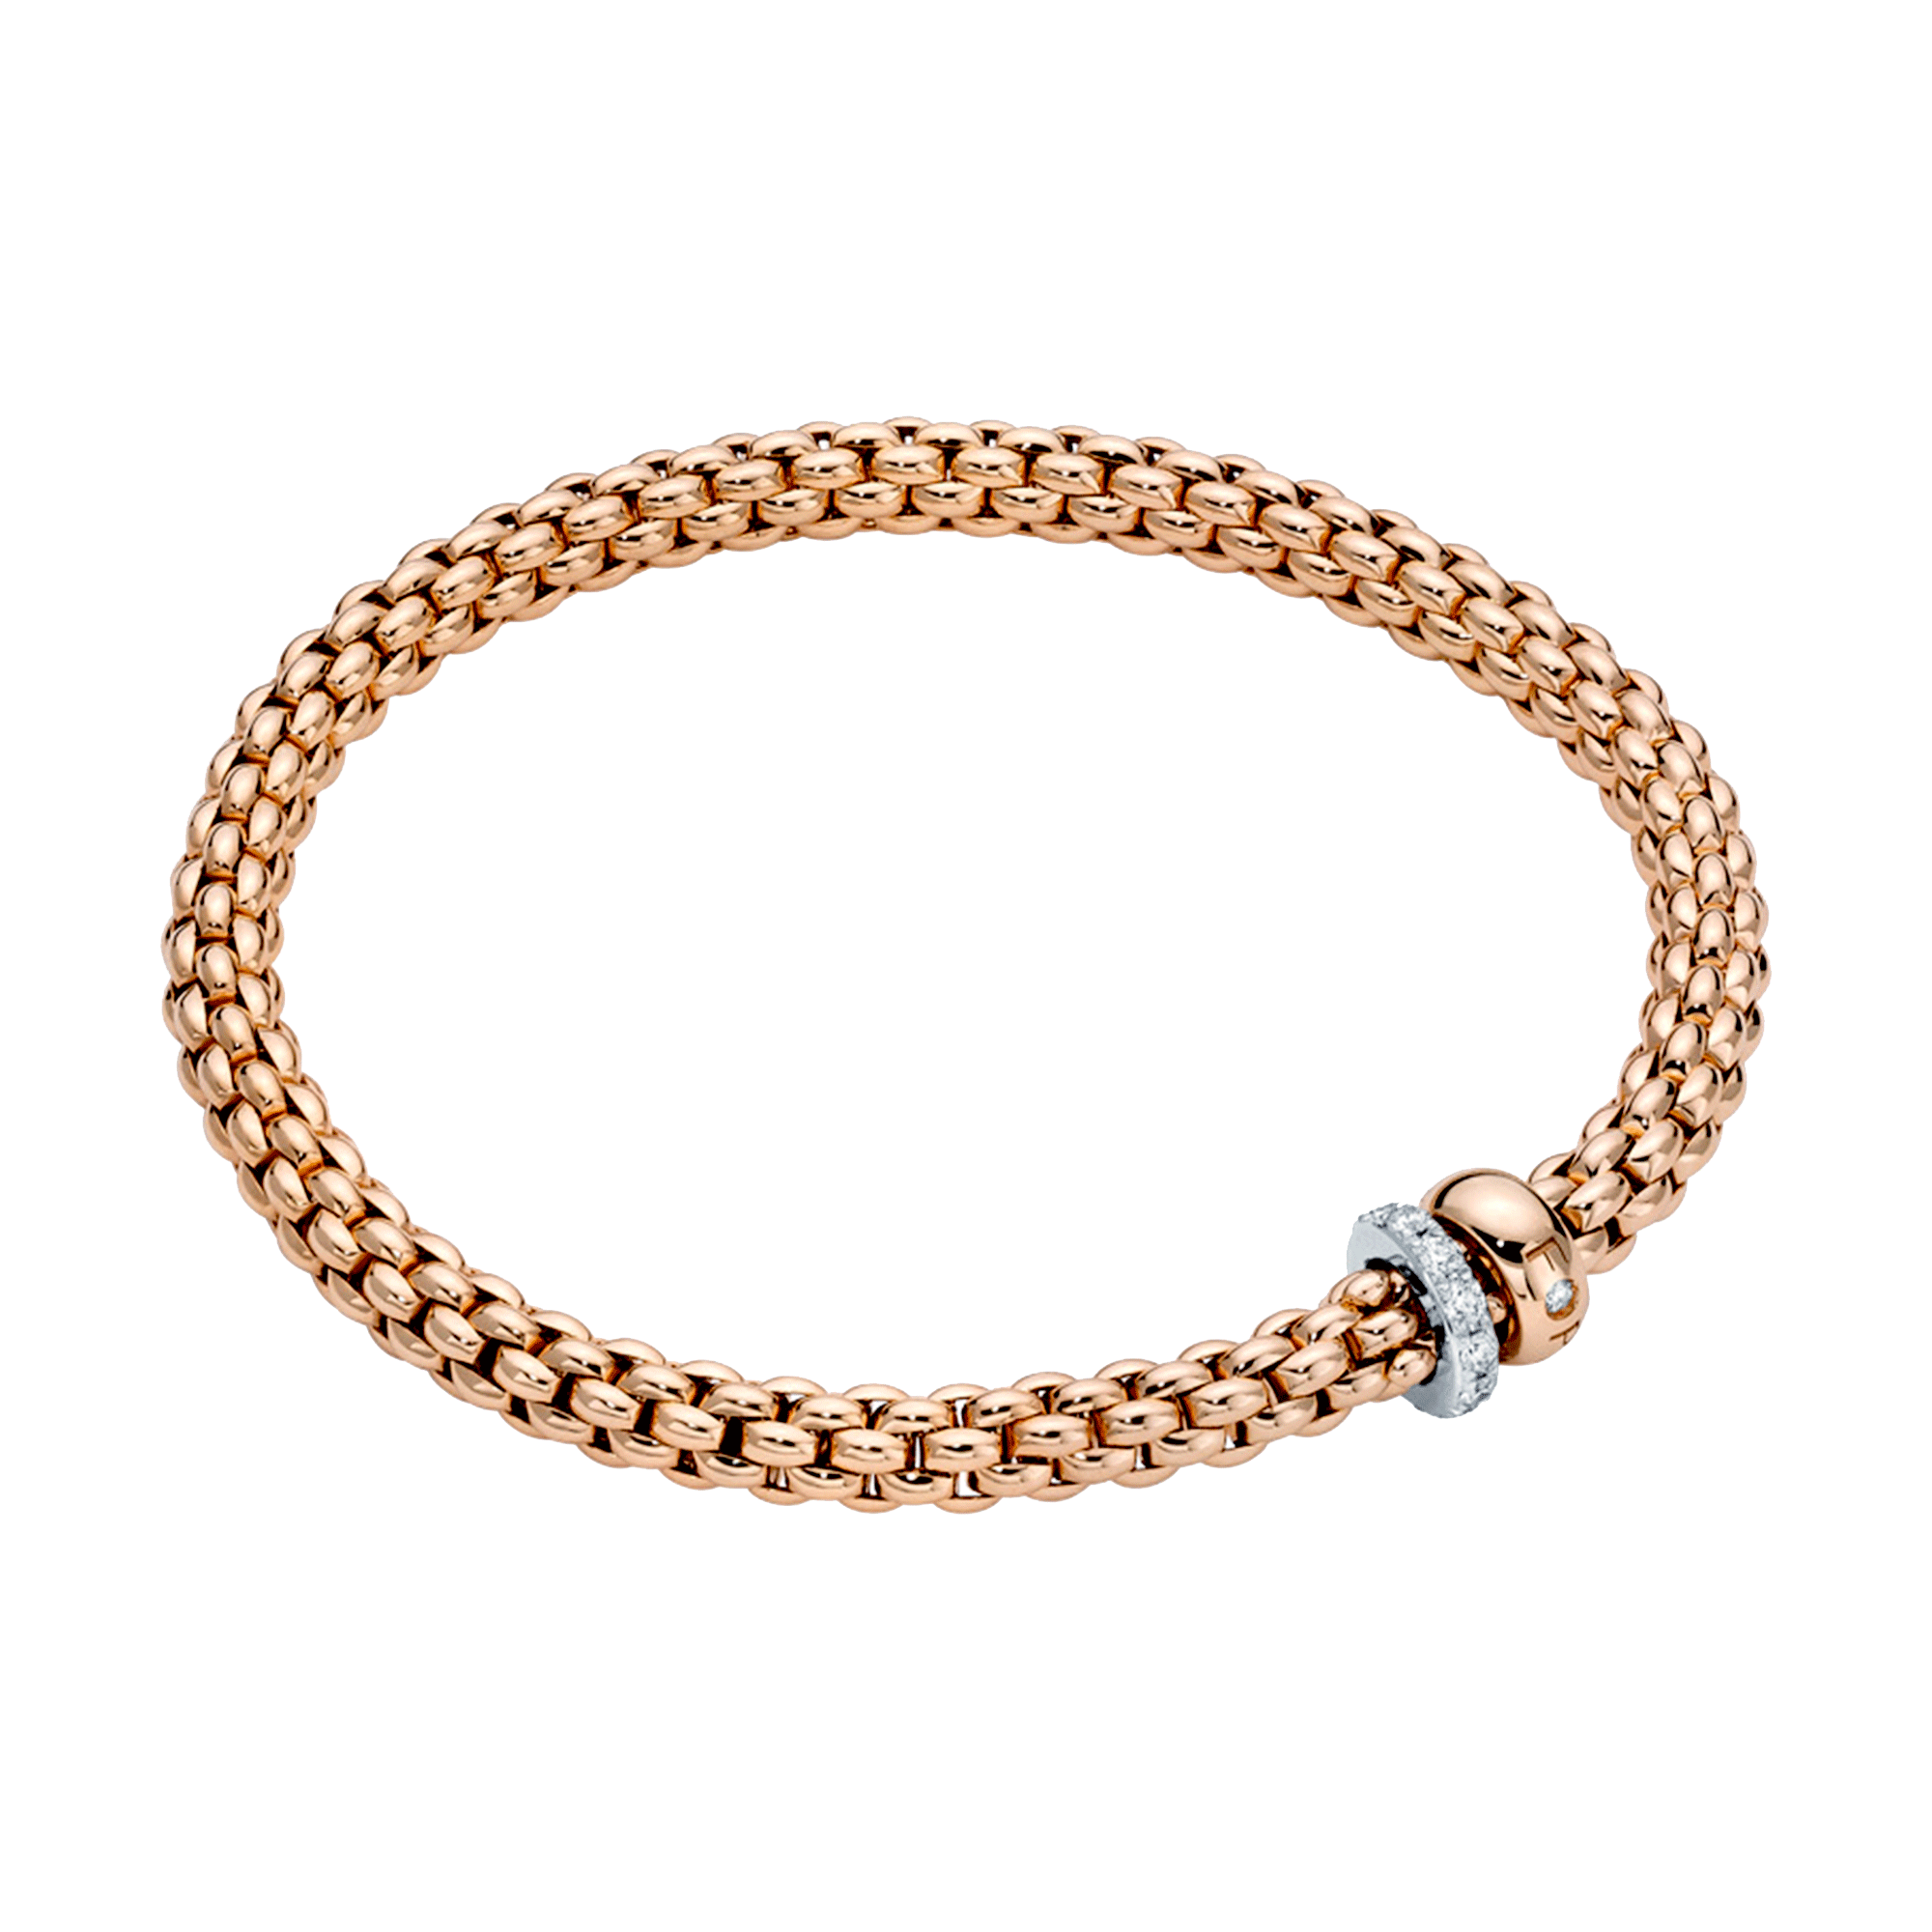 Solo 18ct Rose Gold Bracelet With Pave Diamond Set And Polished Rondels